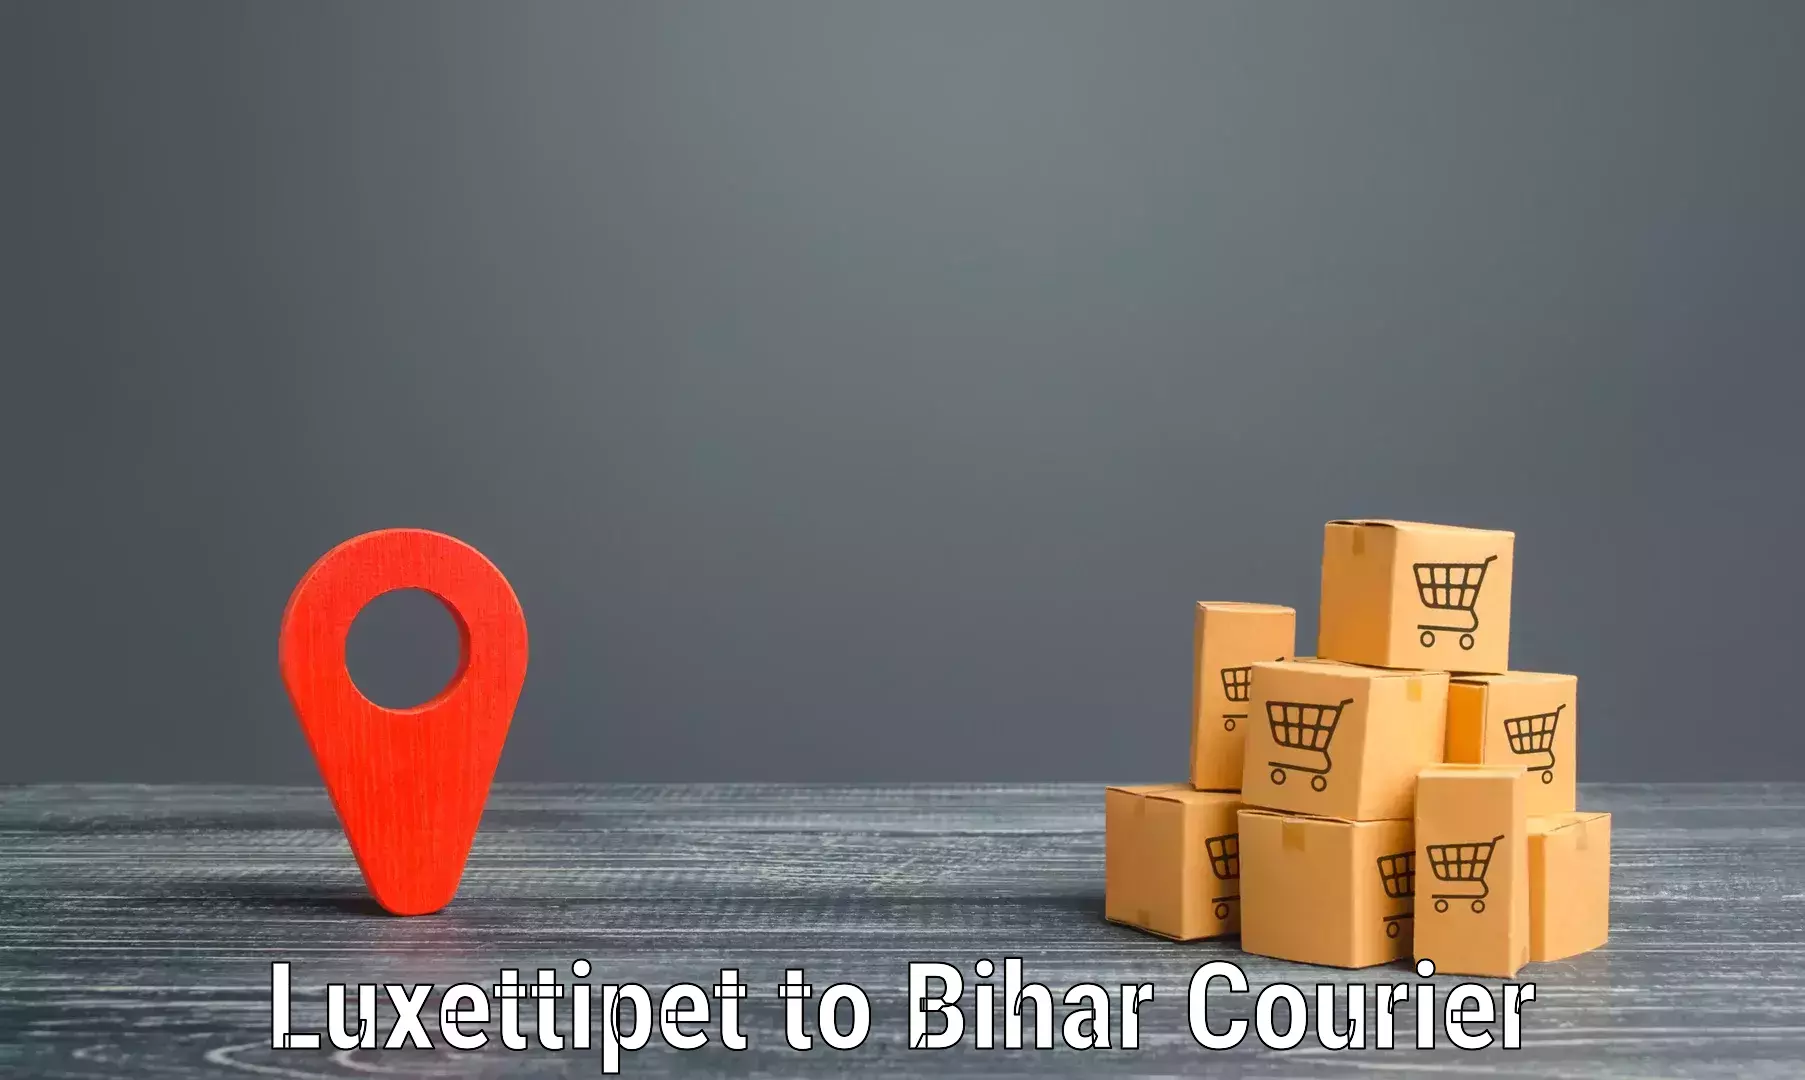 Cash on delivery service in Luxettipet to Minapur